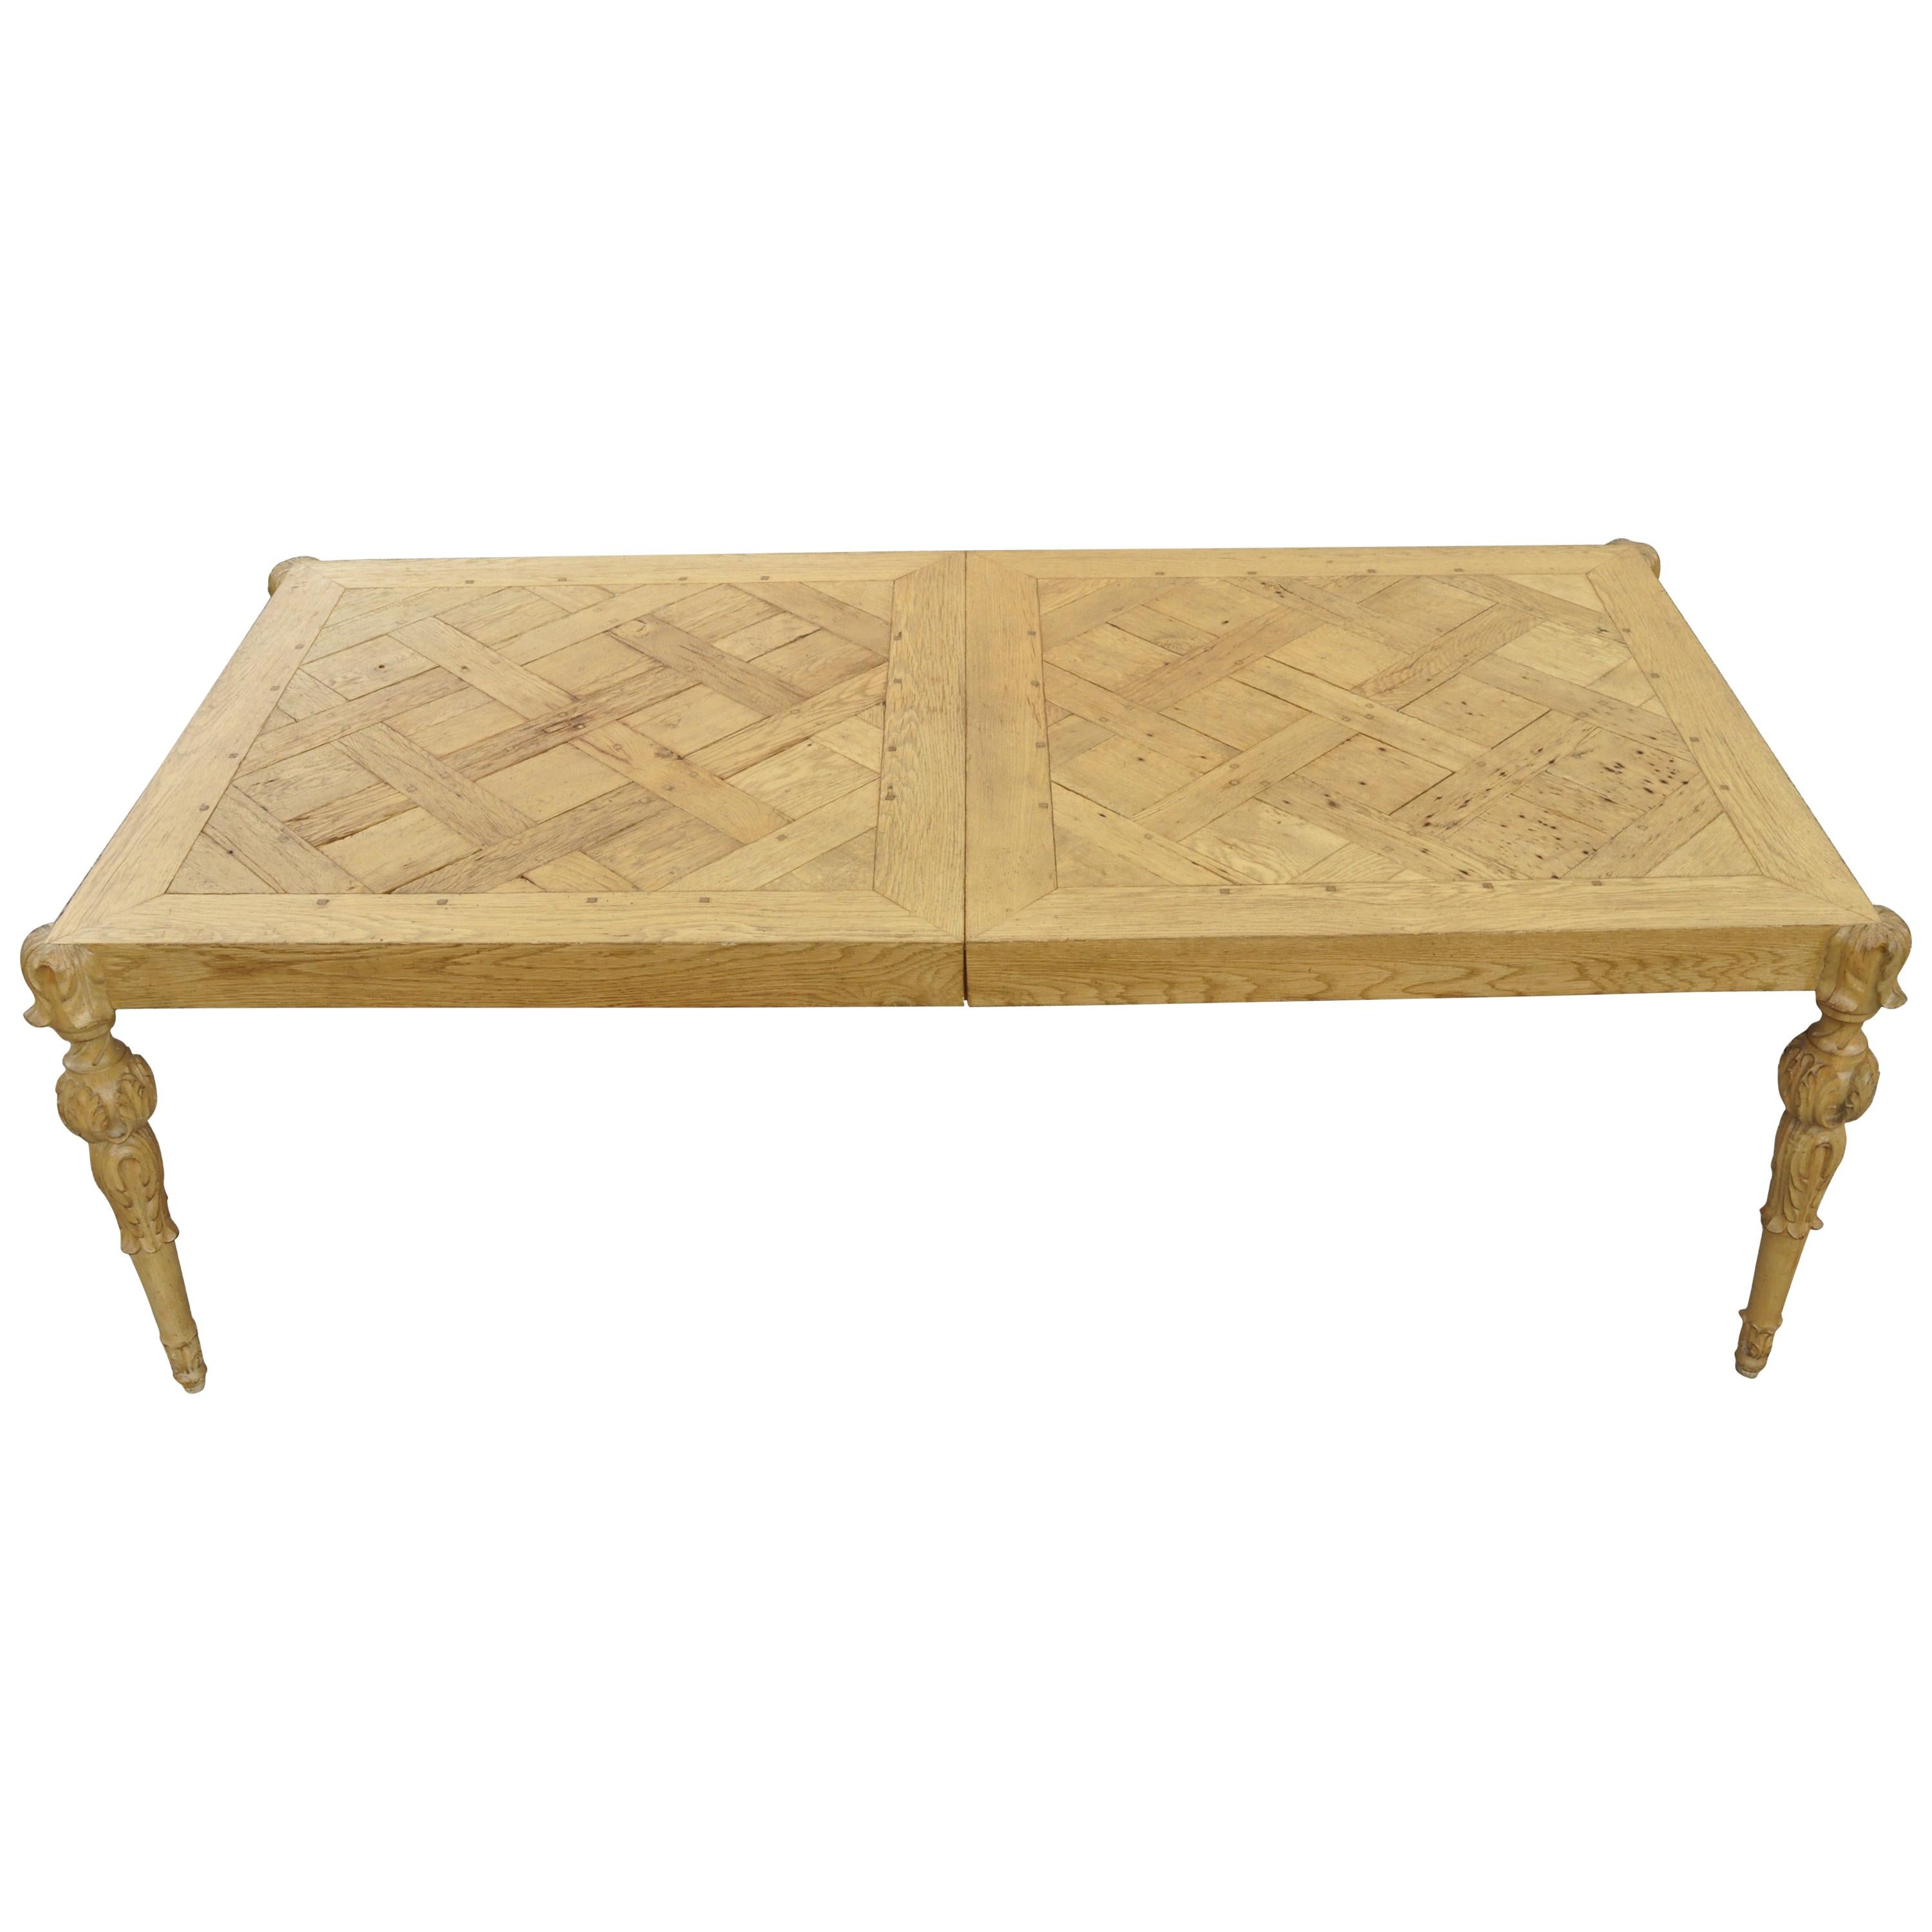 French Baroque Regency Parquetry Inlaid Dining Table of Wood Flooring For Sale